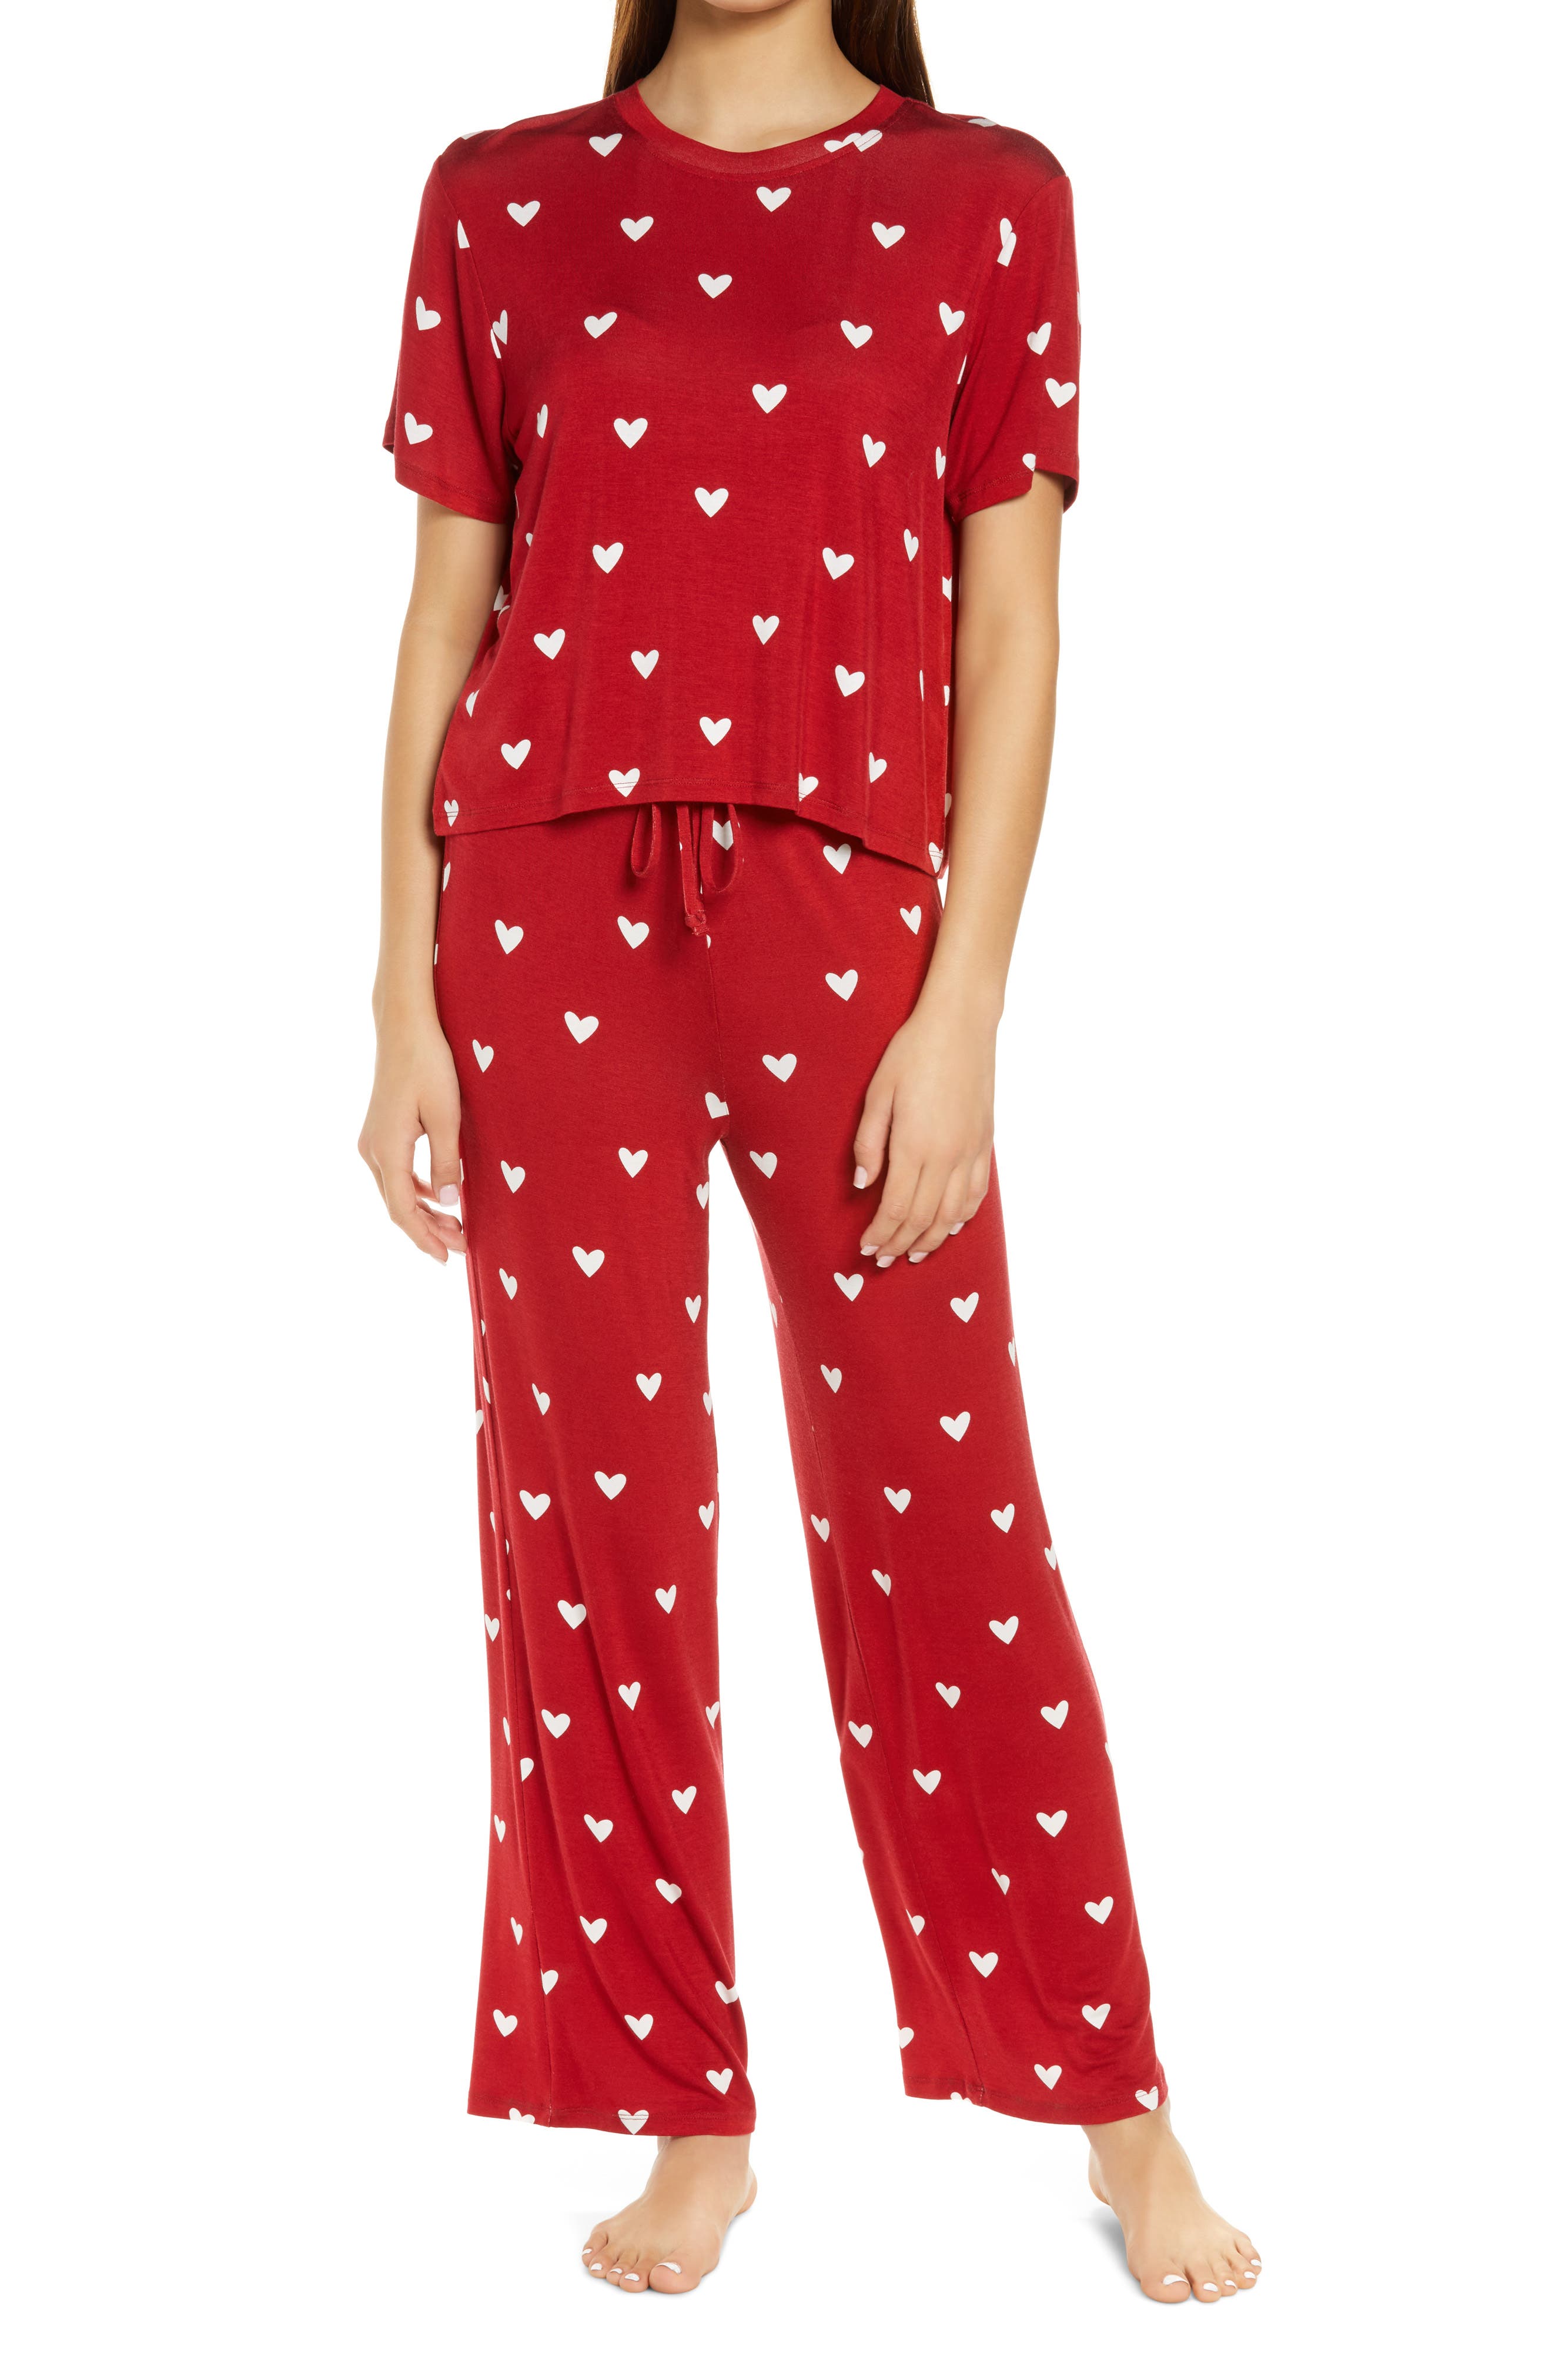 Women's Red Pajama Sets | Nordstrom